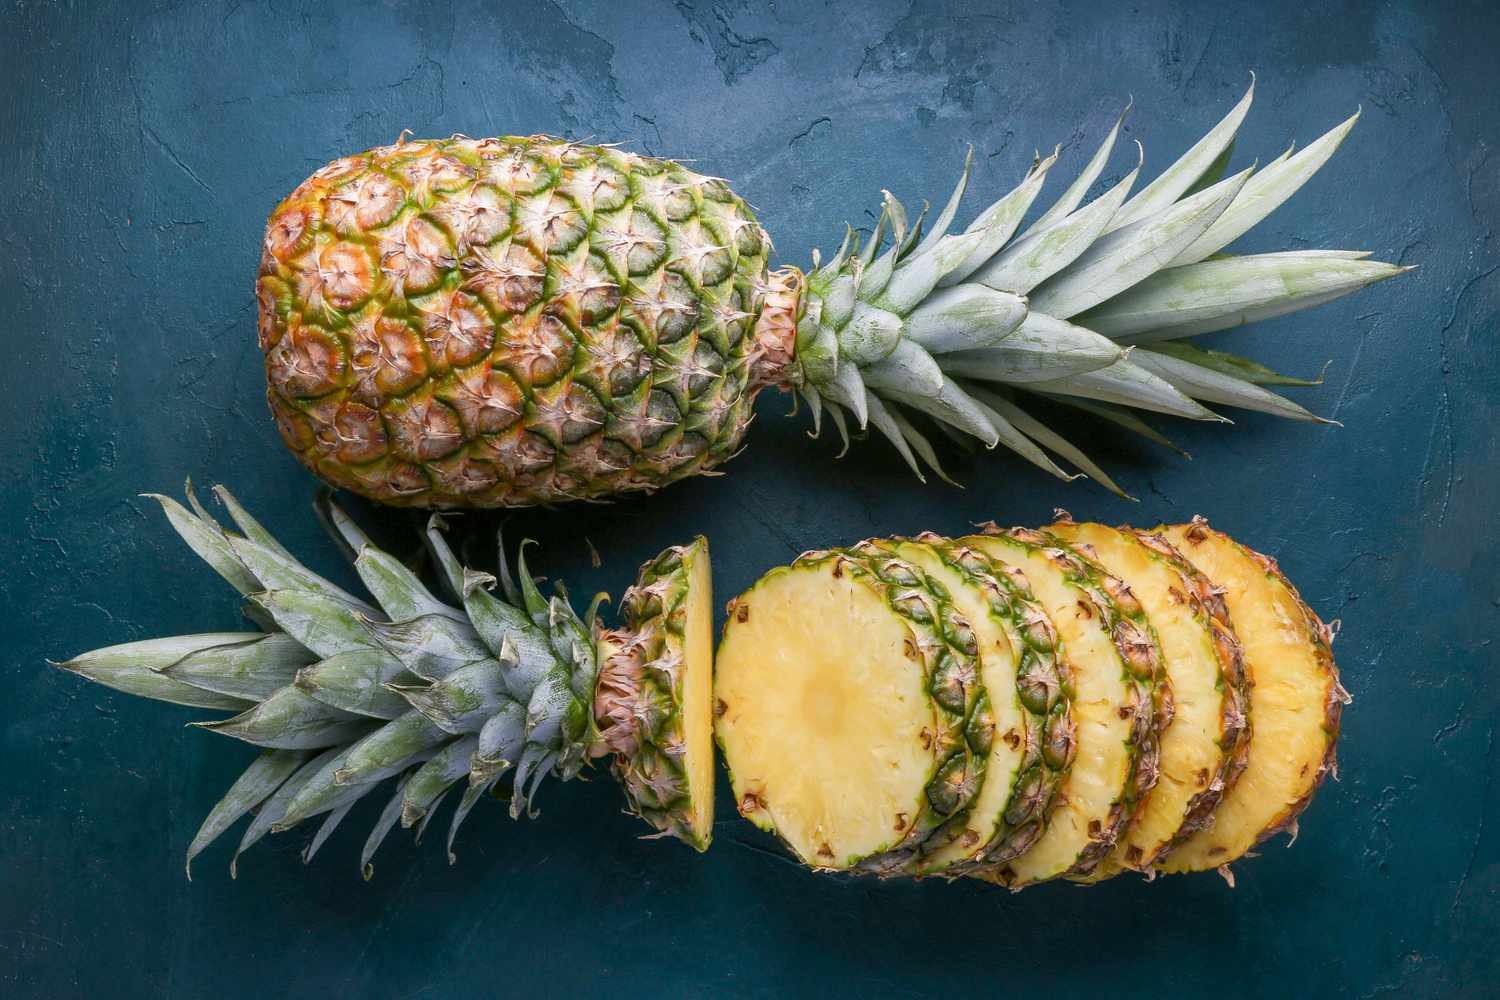 Pineapples are not actually a single fruit but a group of berries fused together.